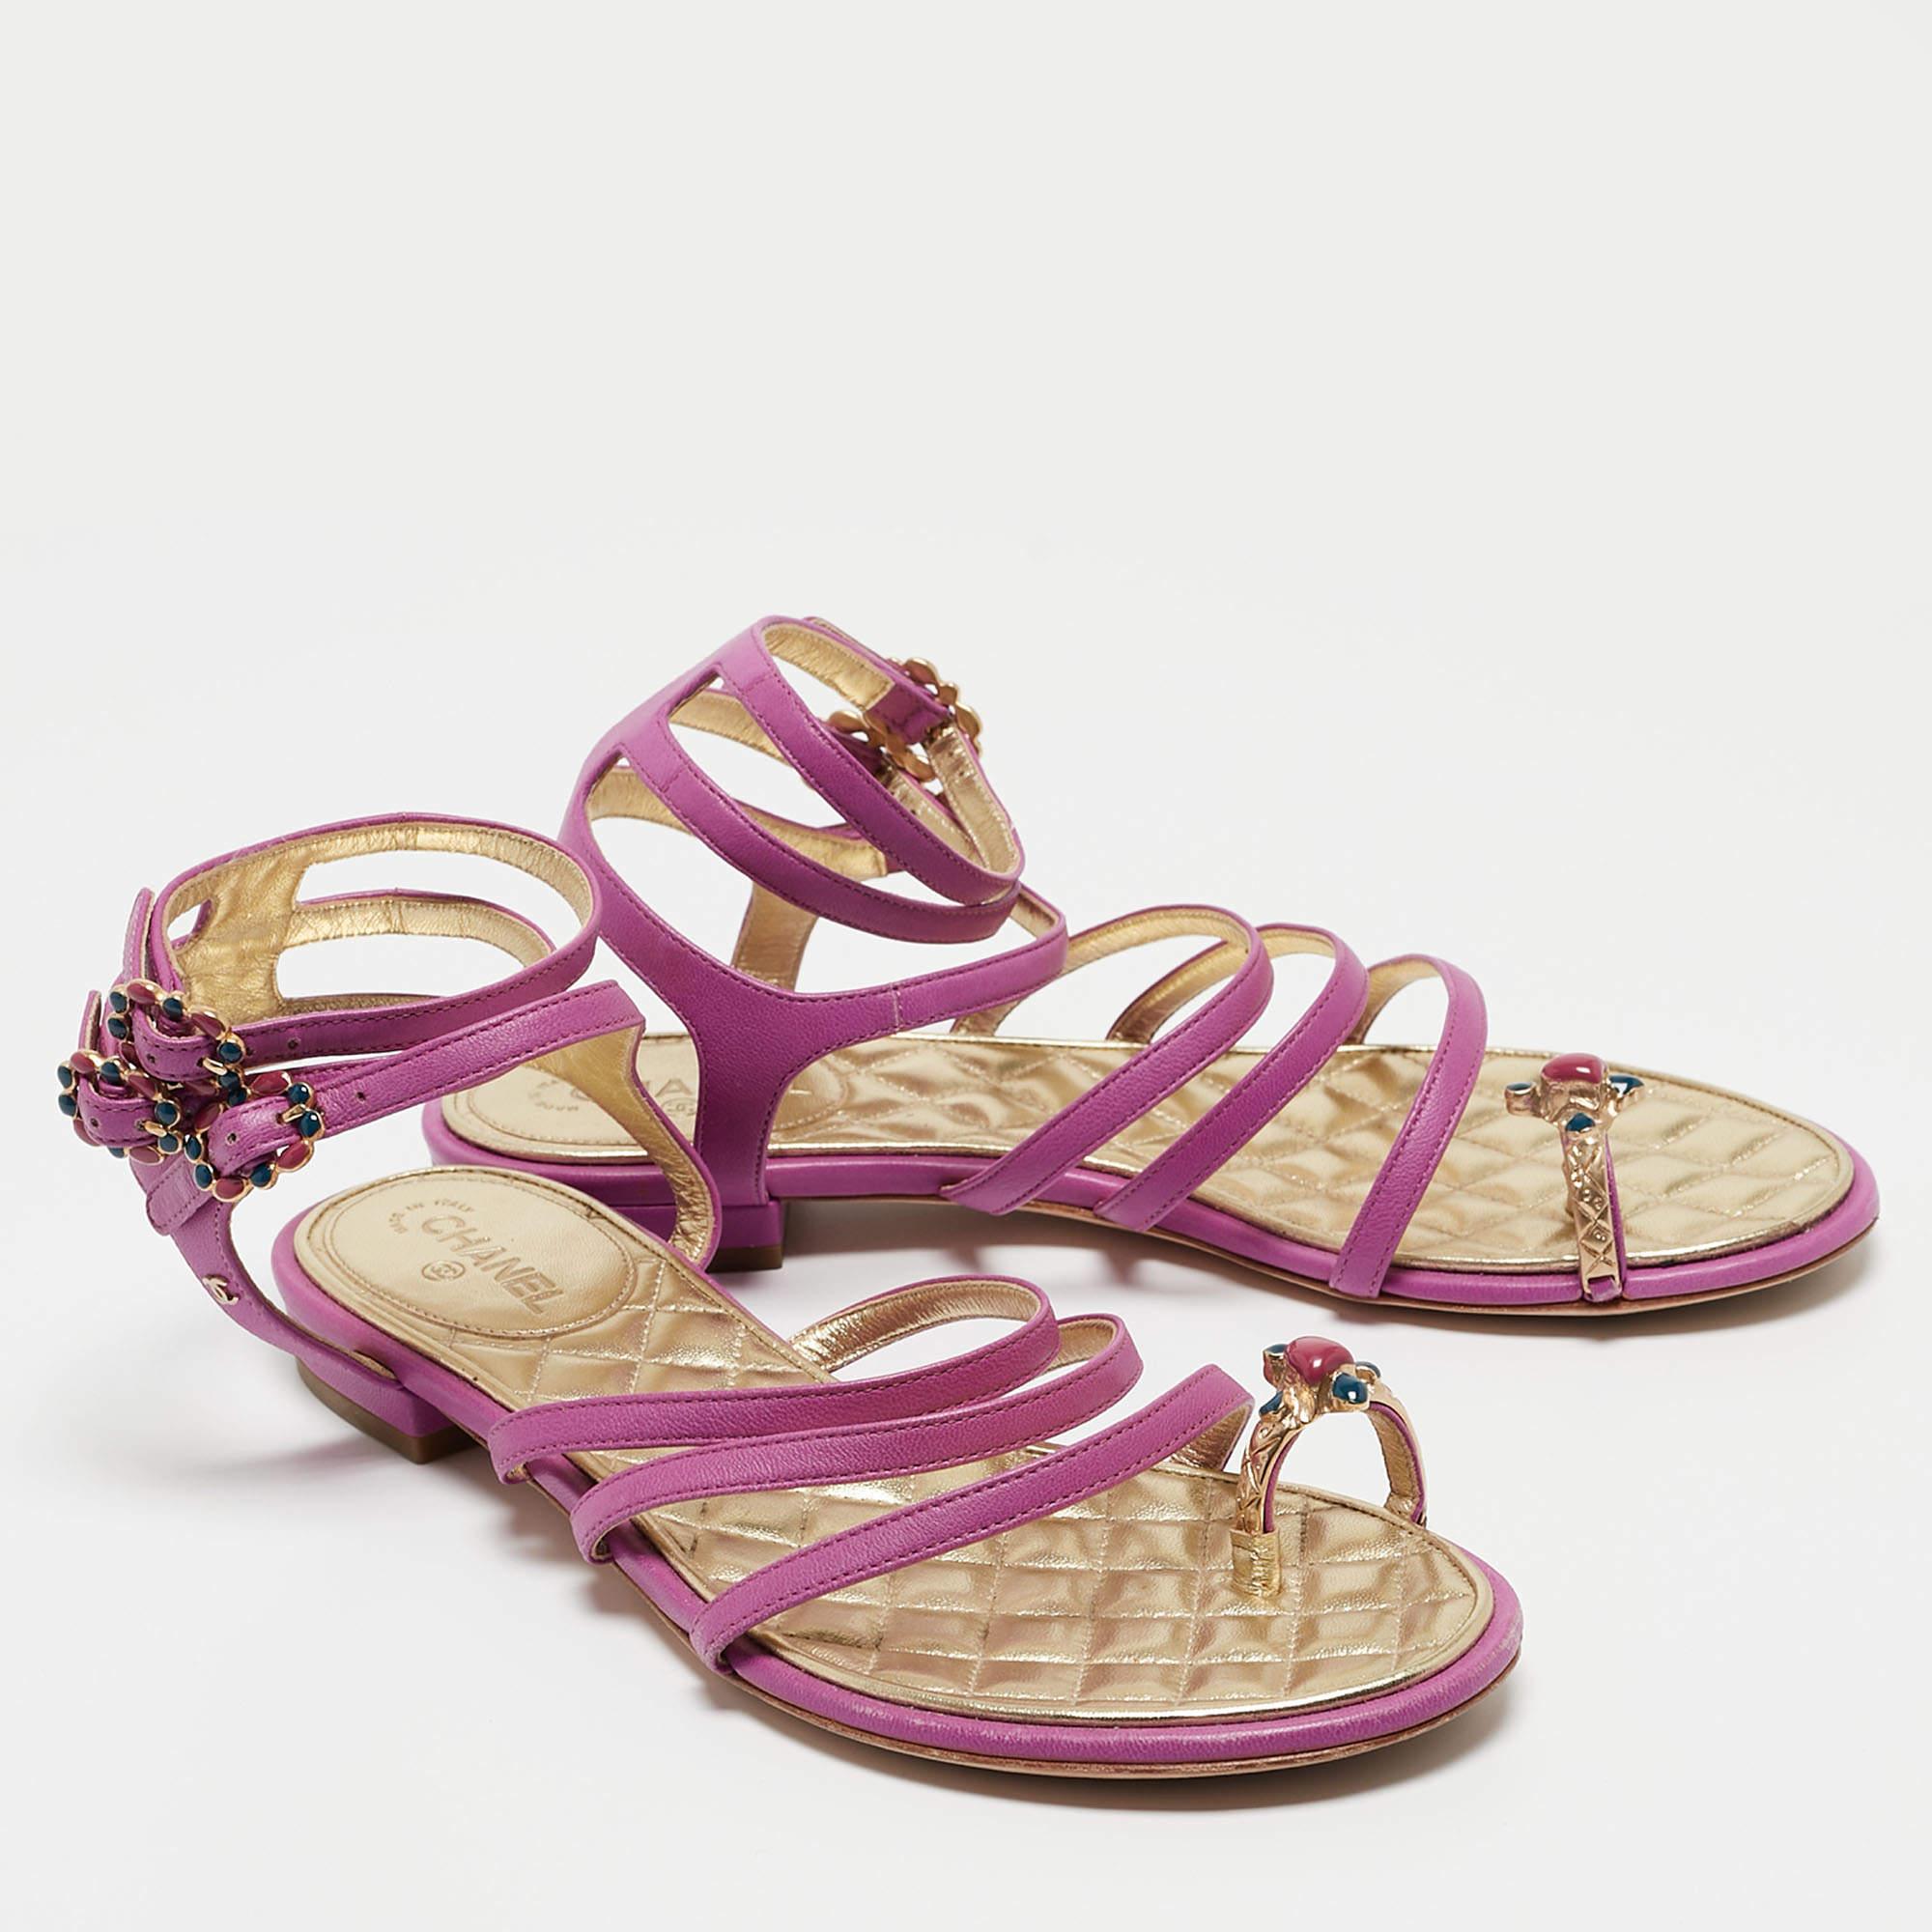 Chanel Purple Leather Embellished Toe Ring Ankle Strap Flat Sandals Size 36.5 1